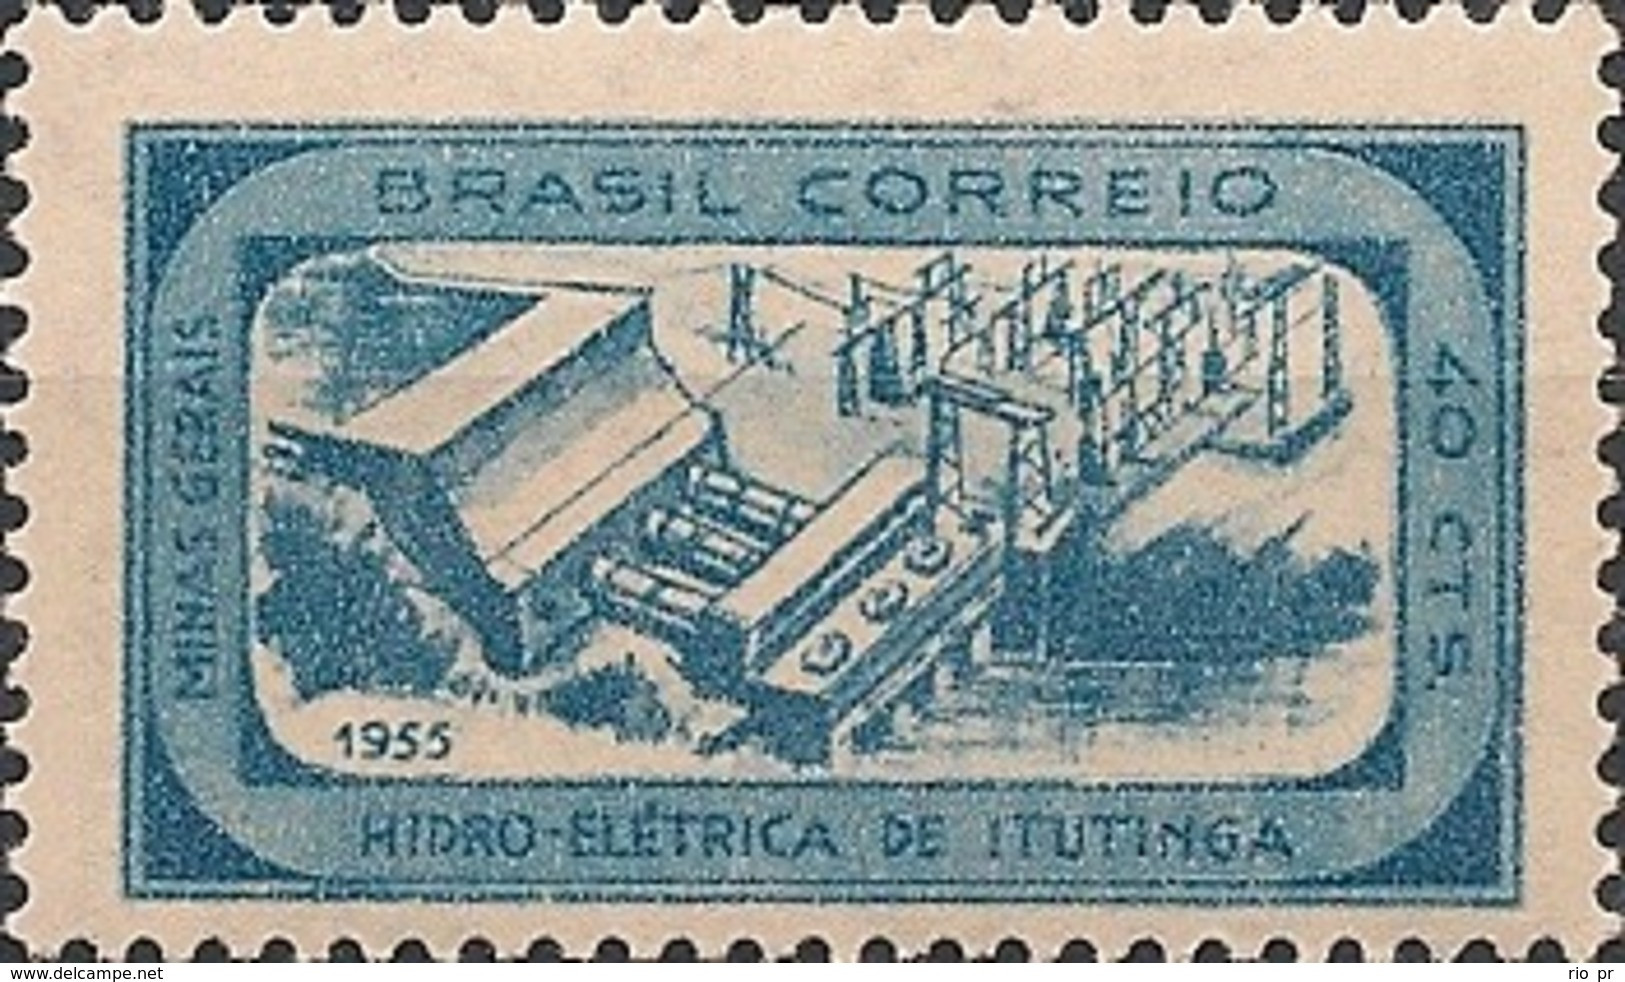 BRAZIL - INAUGURATION OF THE ITUTINGA HYDROELECTRIC PLANT AT LAVRAS 1955 - MNH - Acqua